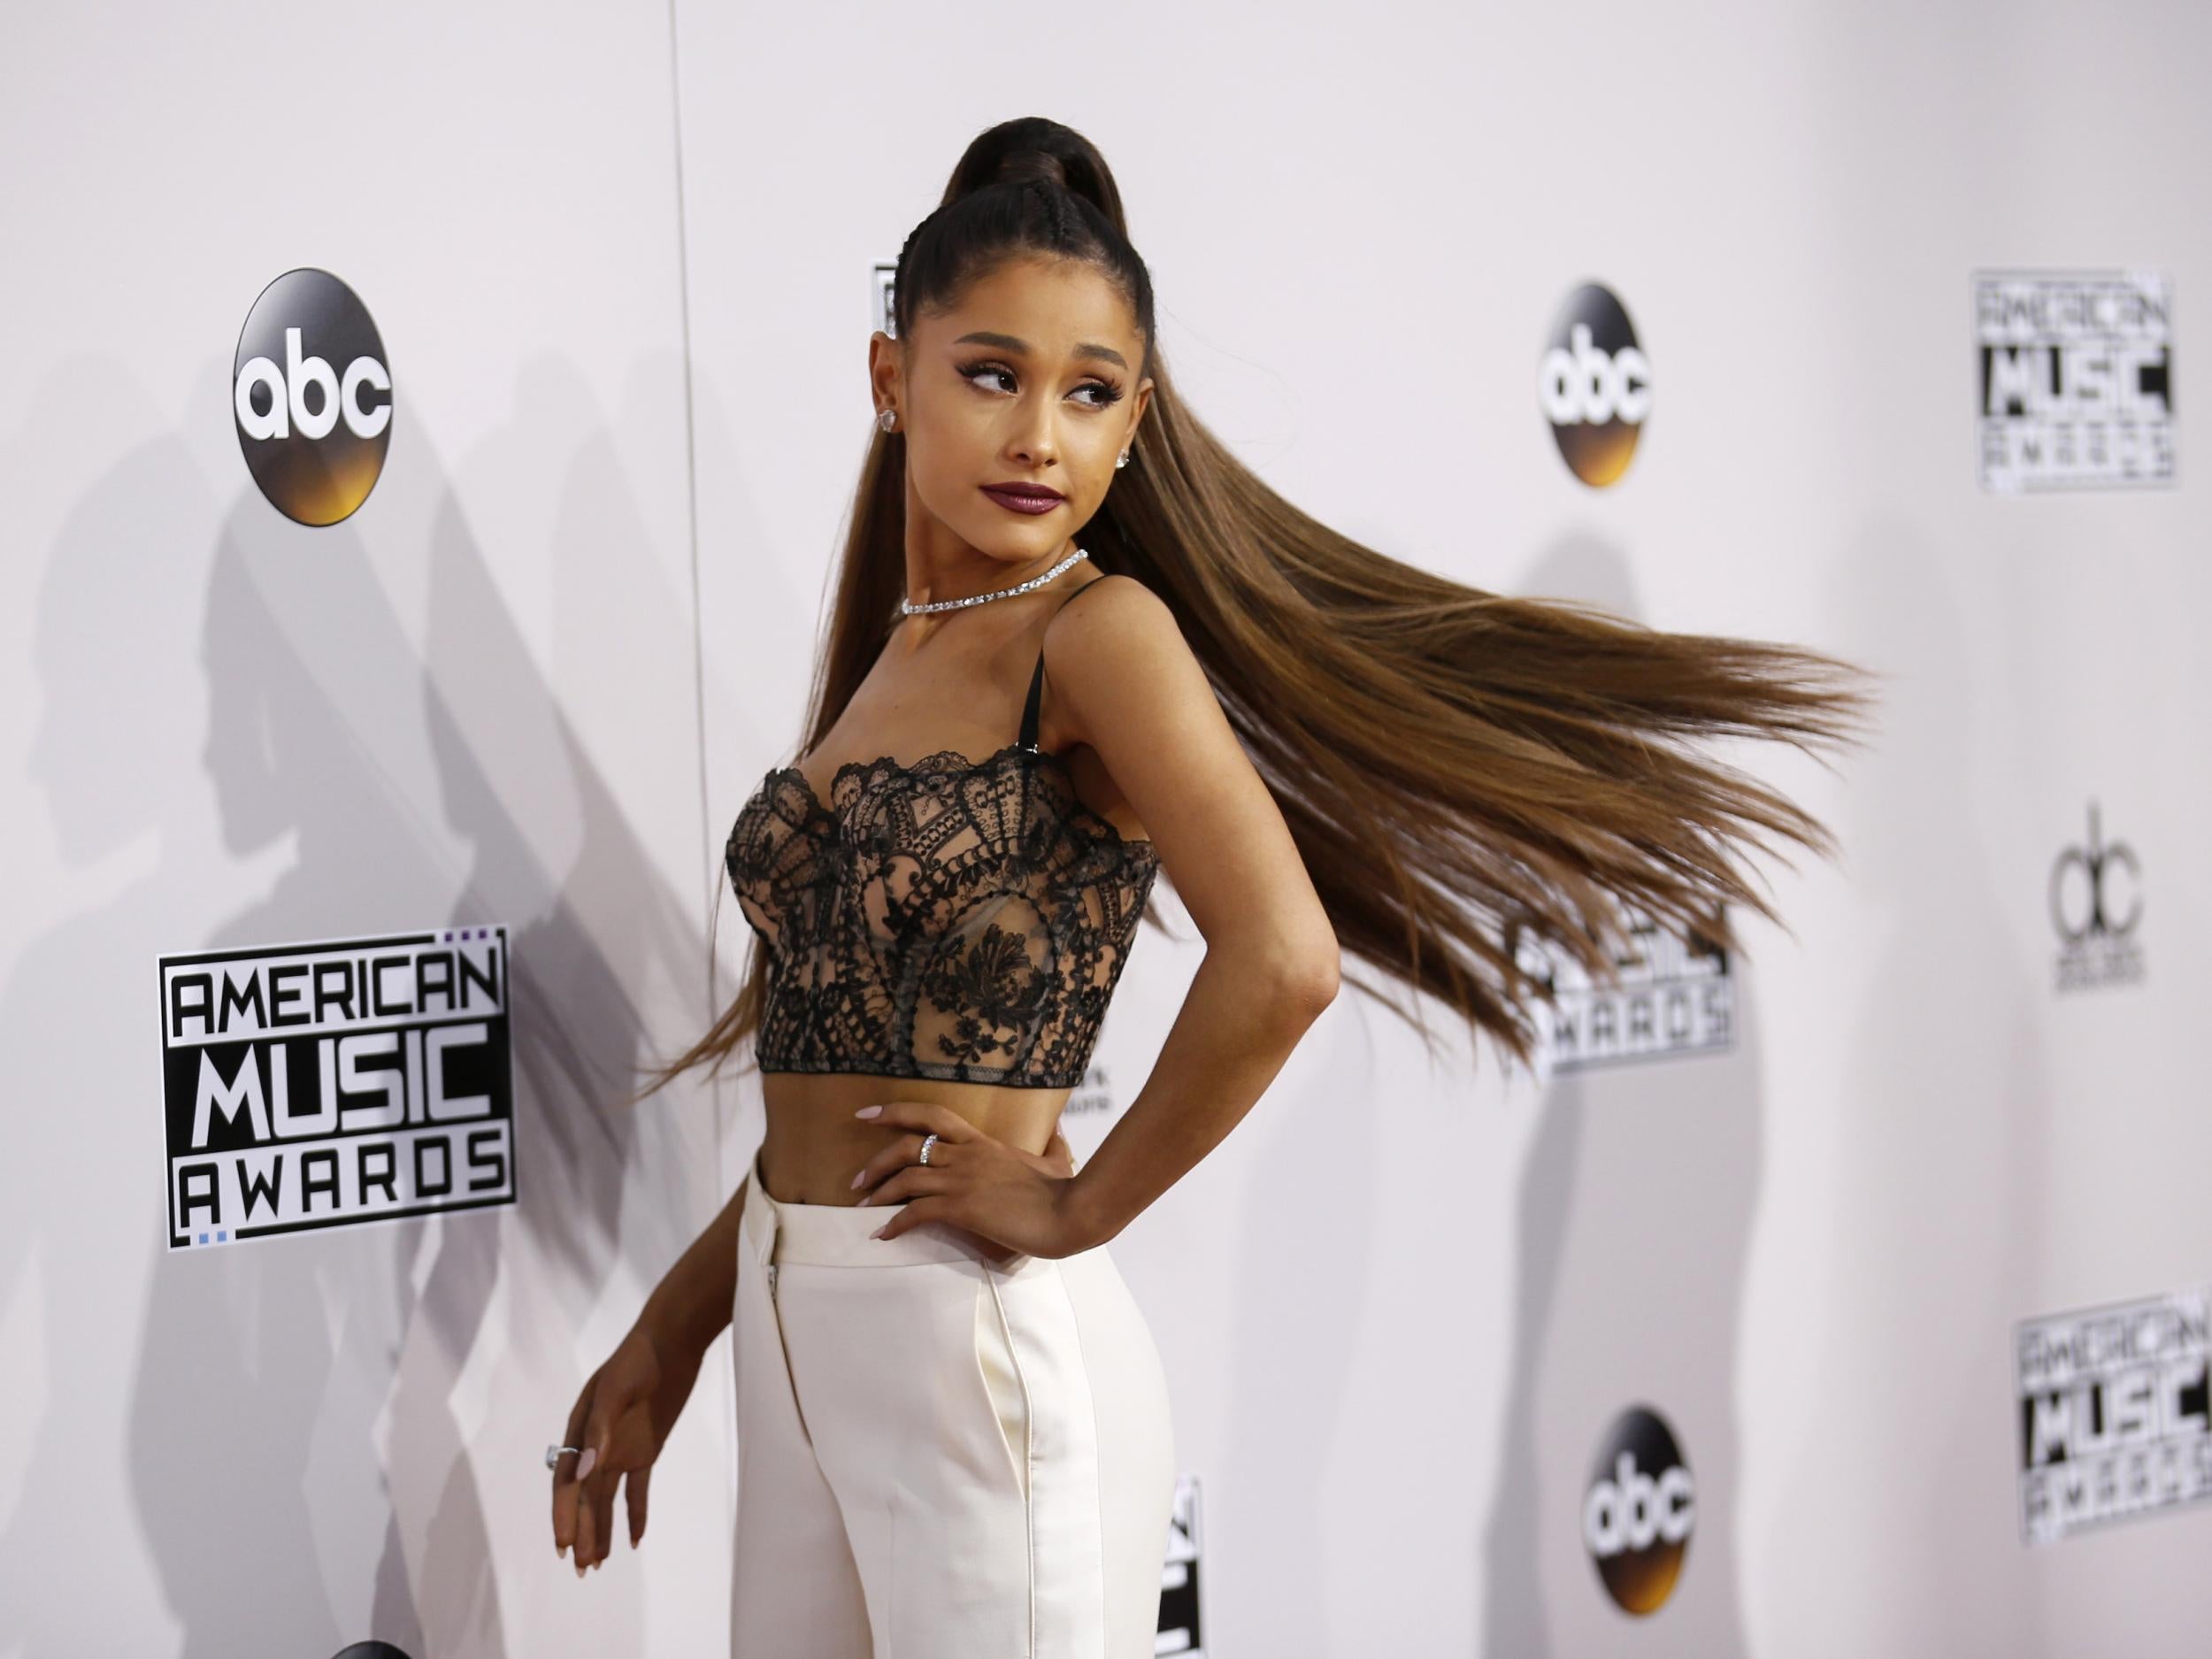 Ariana Grande said she was 'broken' by the events of Monday night in a tweet to fans